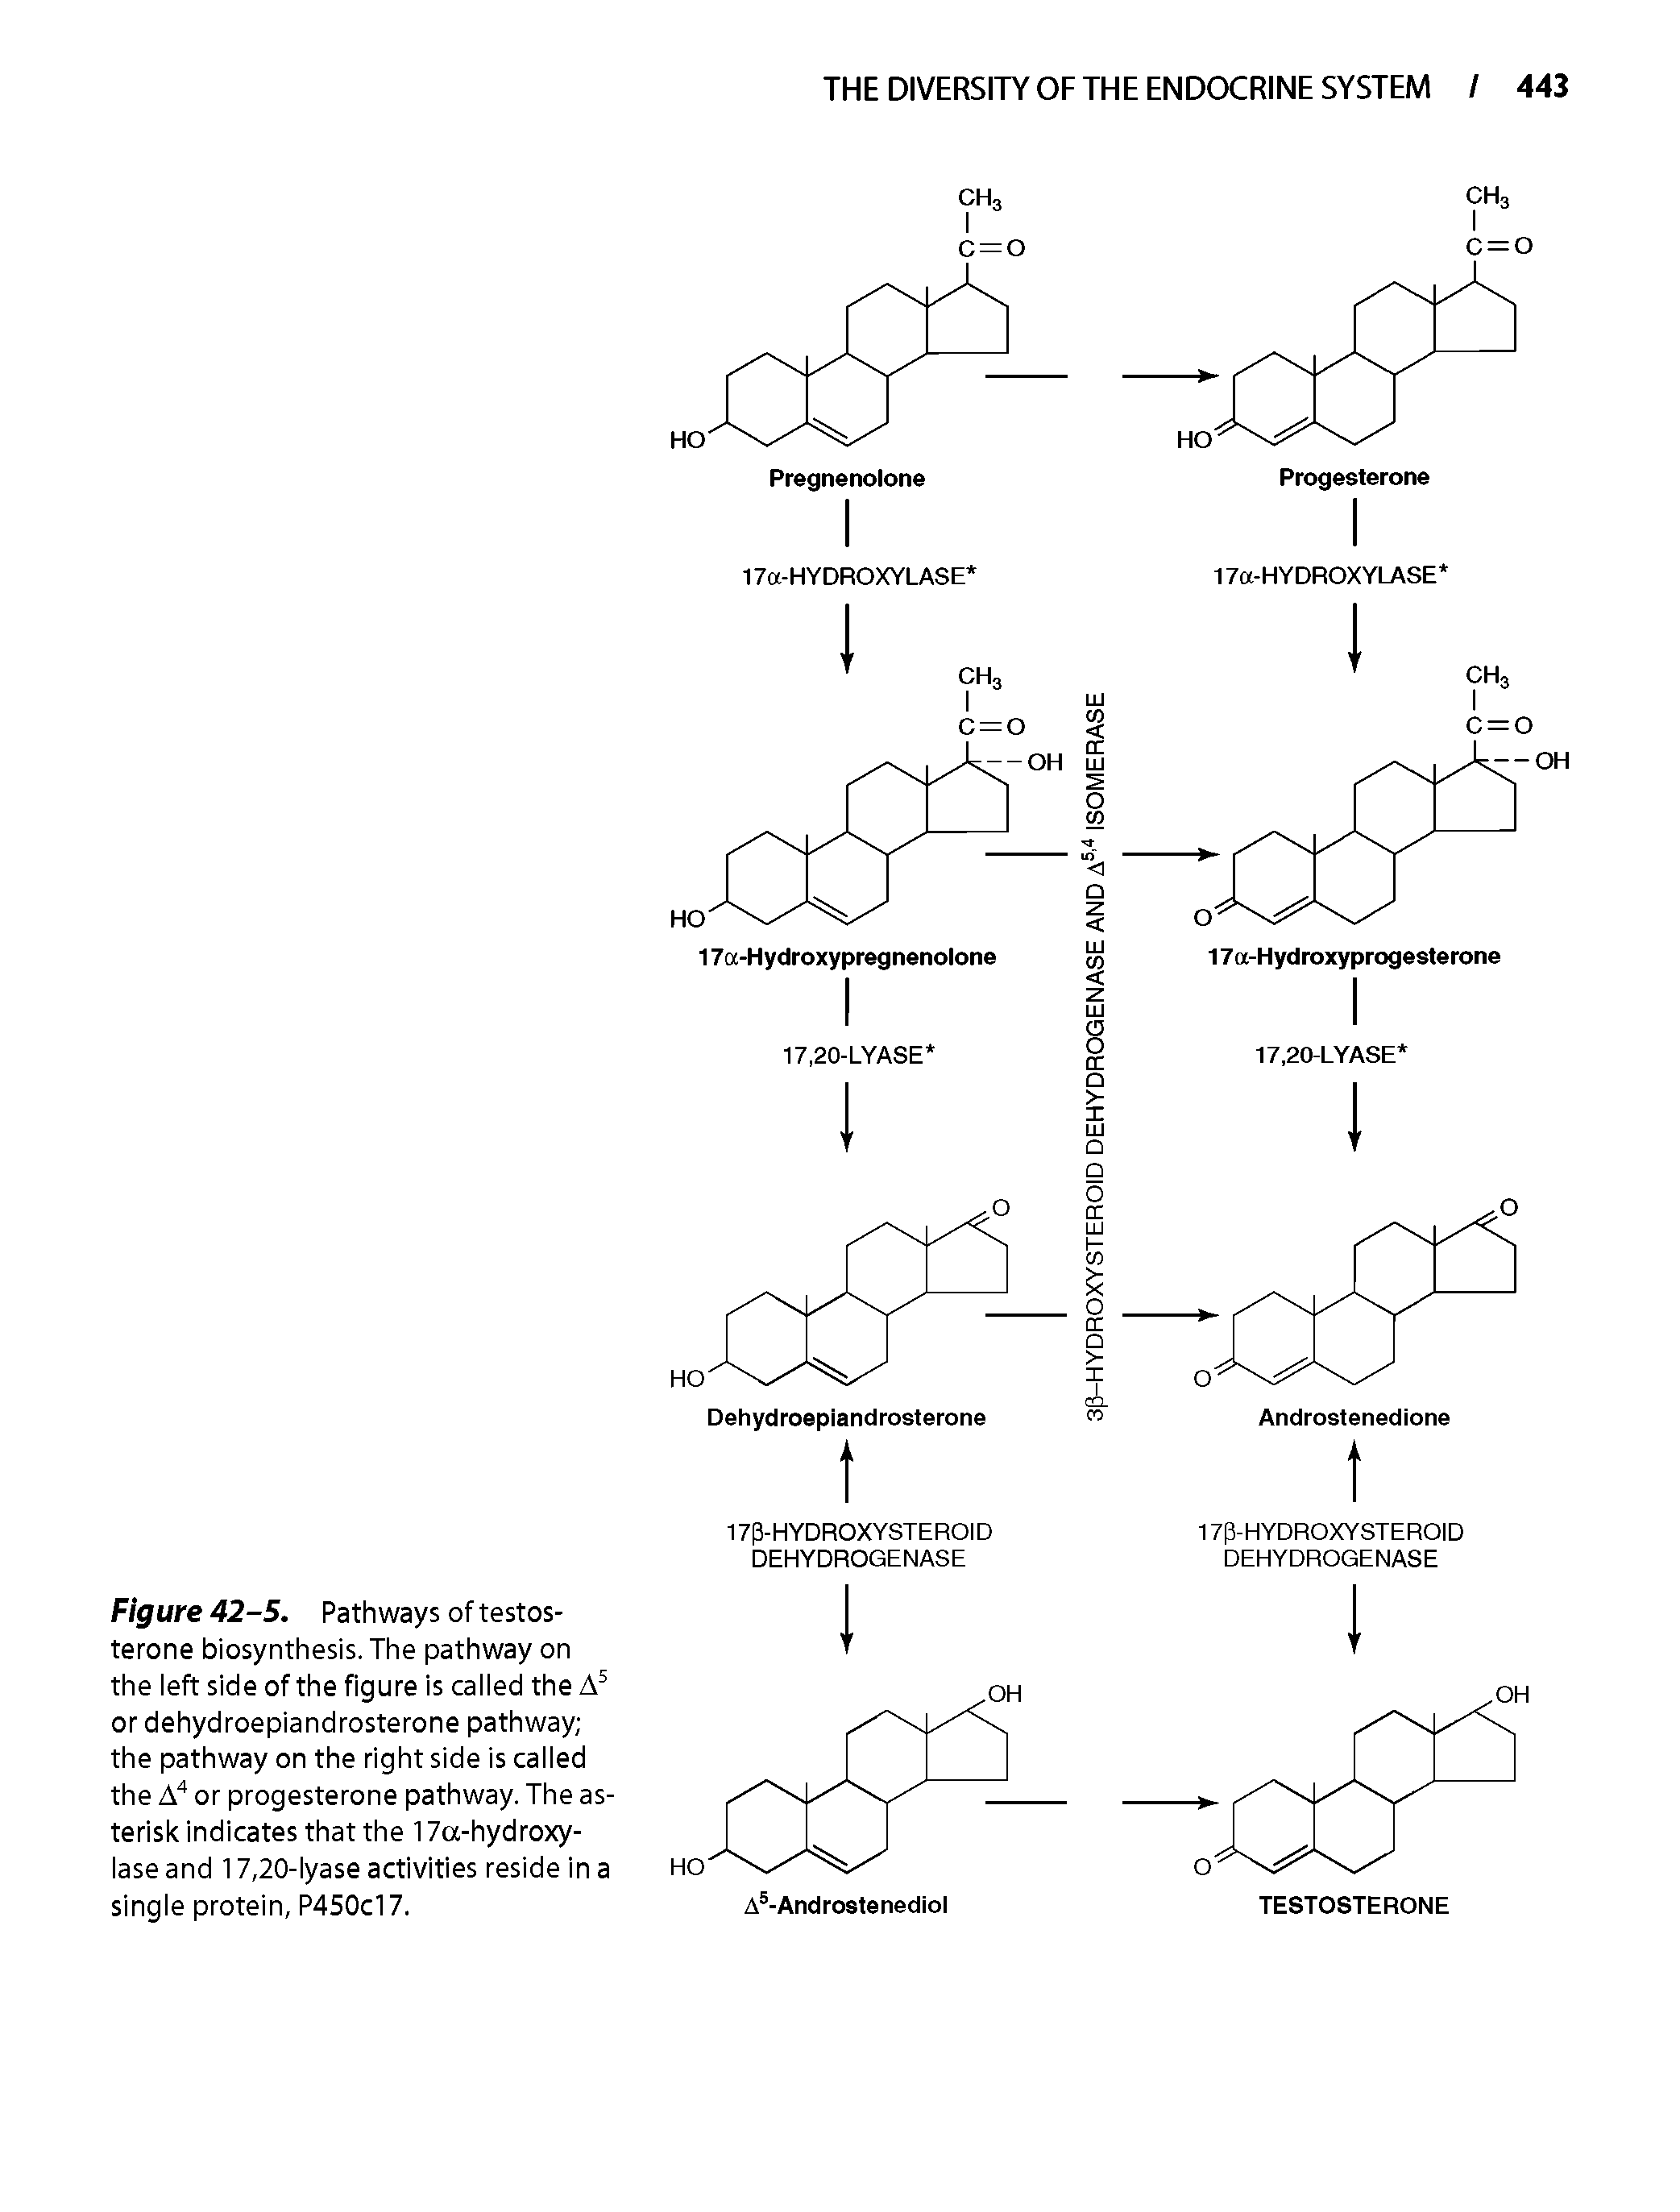 Figure 42-5. Pathways of testosterone biosynthesis. The pathway on the left side of the figure is called the or dehydroepiandrosterone pathway the pathway on the right side is called the A" or progesterone pathway. The asterisk indicates that the 17a-hydroxy-lase and 17,20-lyase activities reside in a single protein, P450cl7.